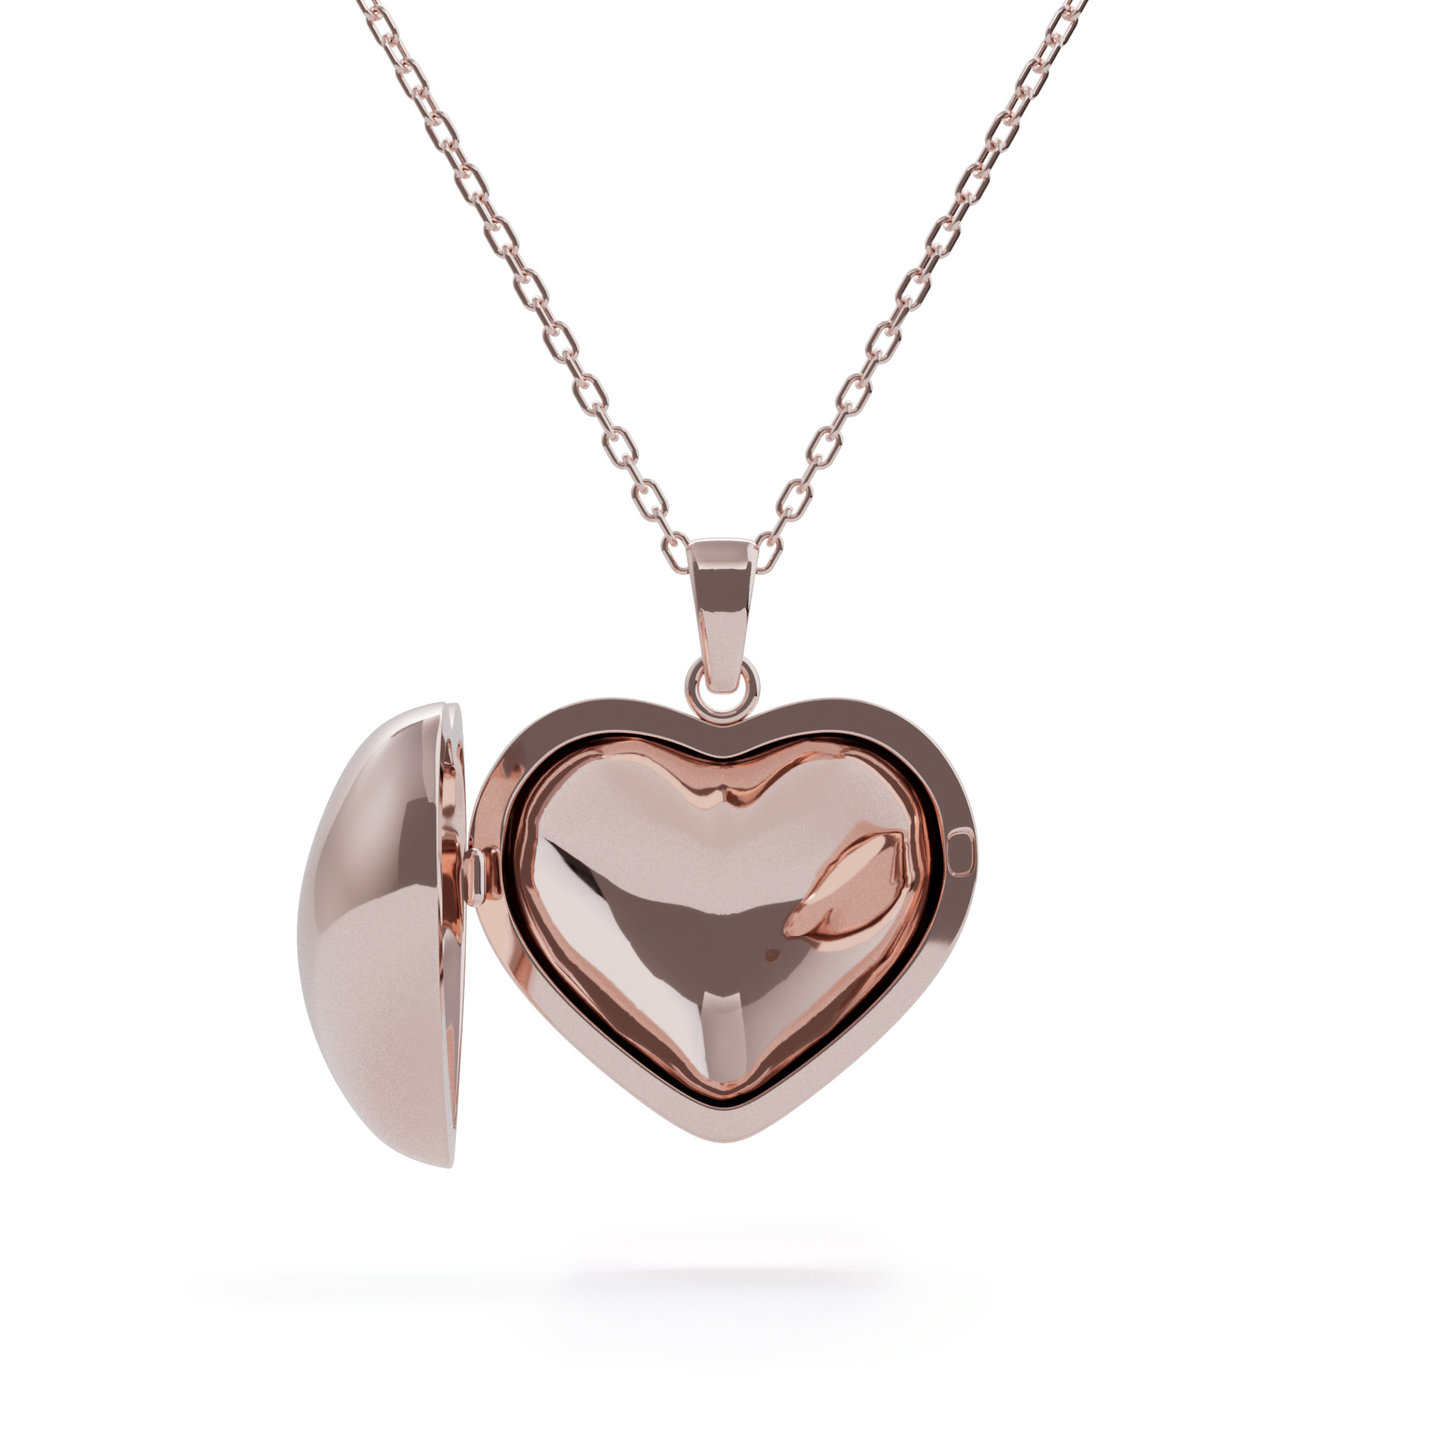 Heart Locket Charm Necklace - Rose Gold